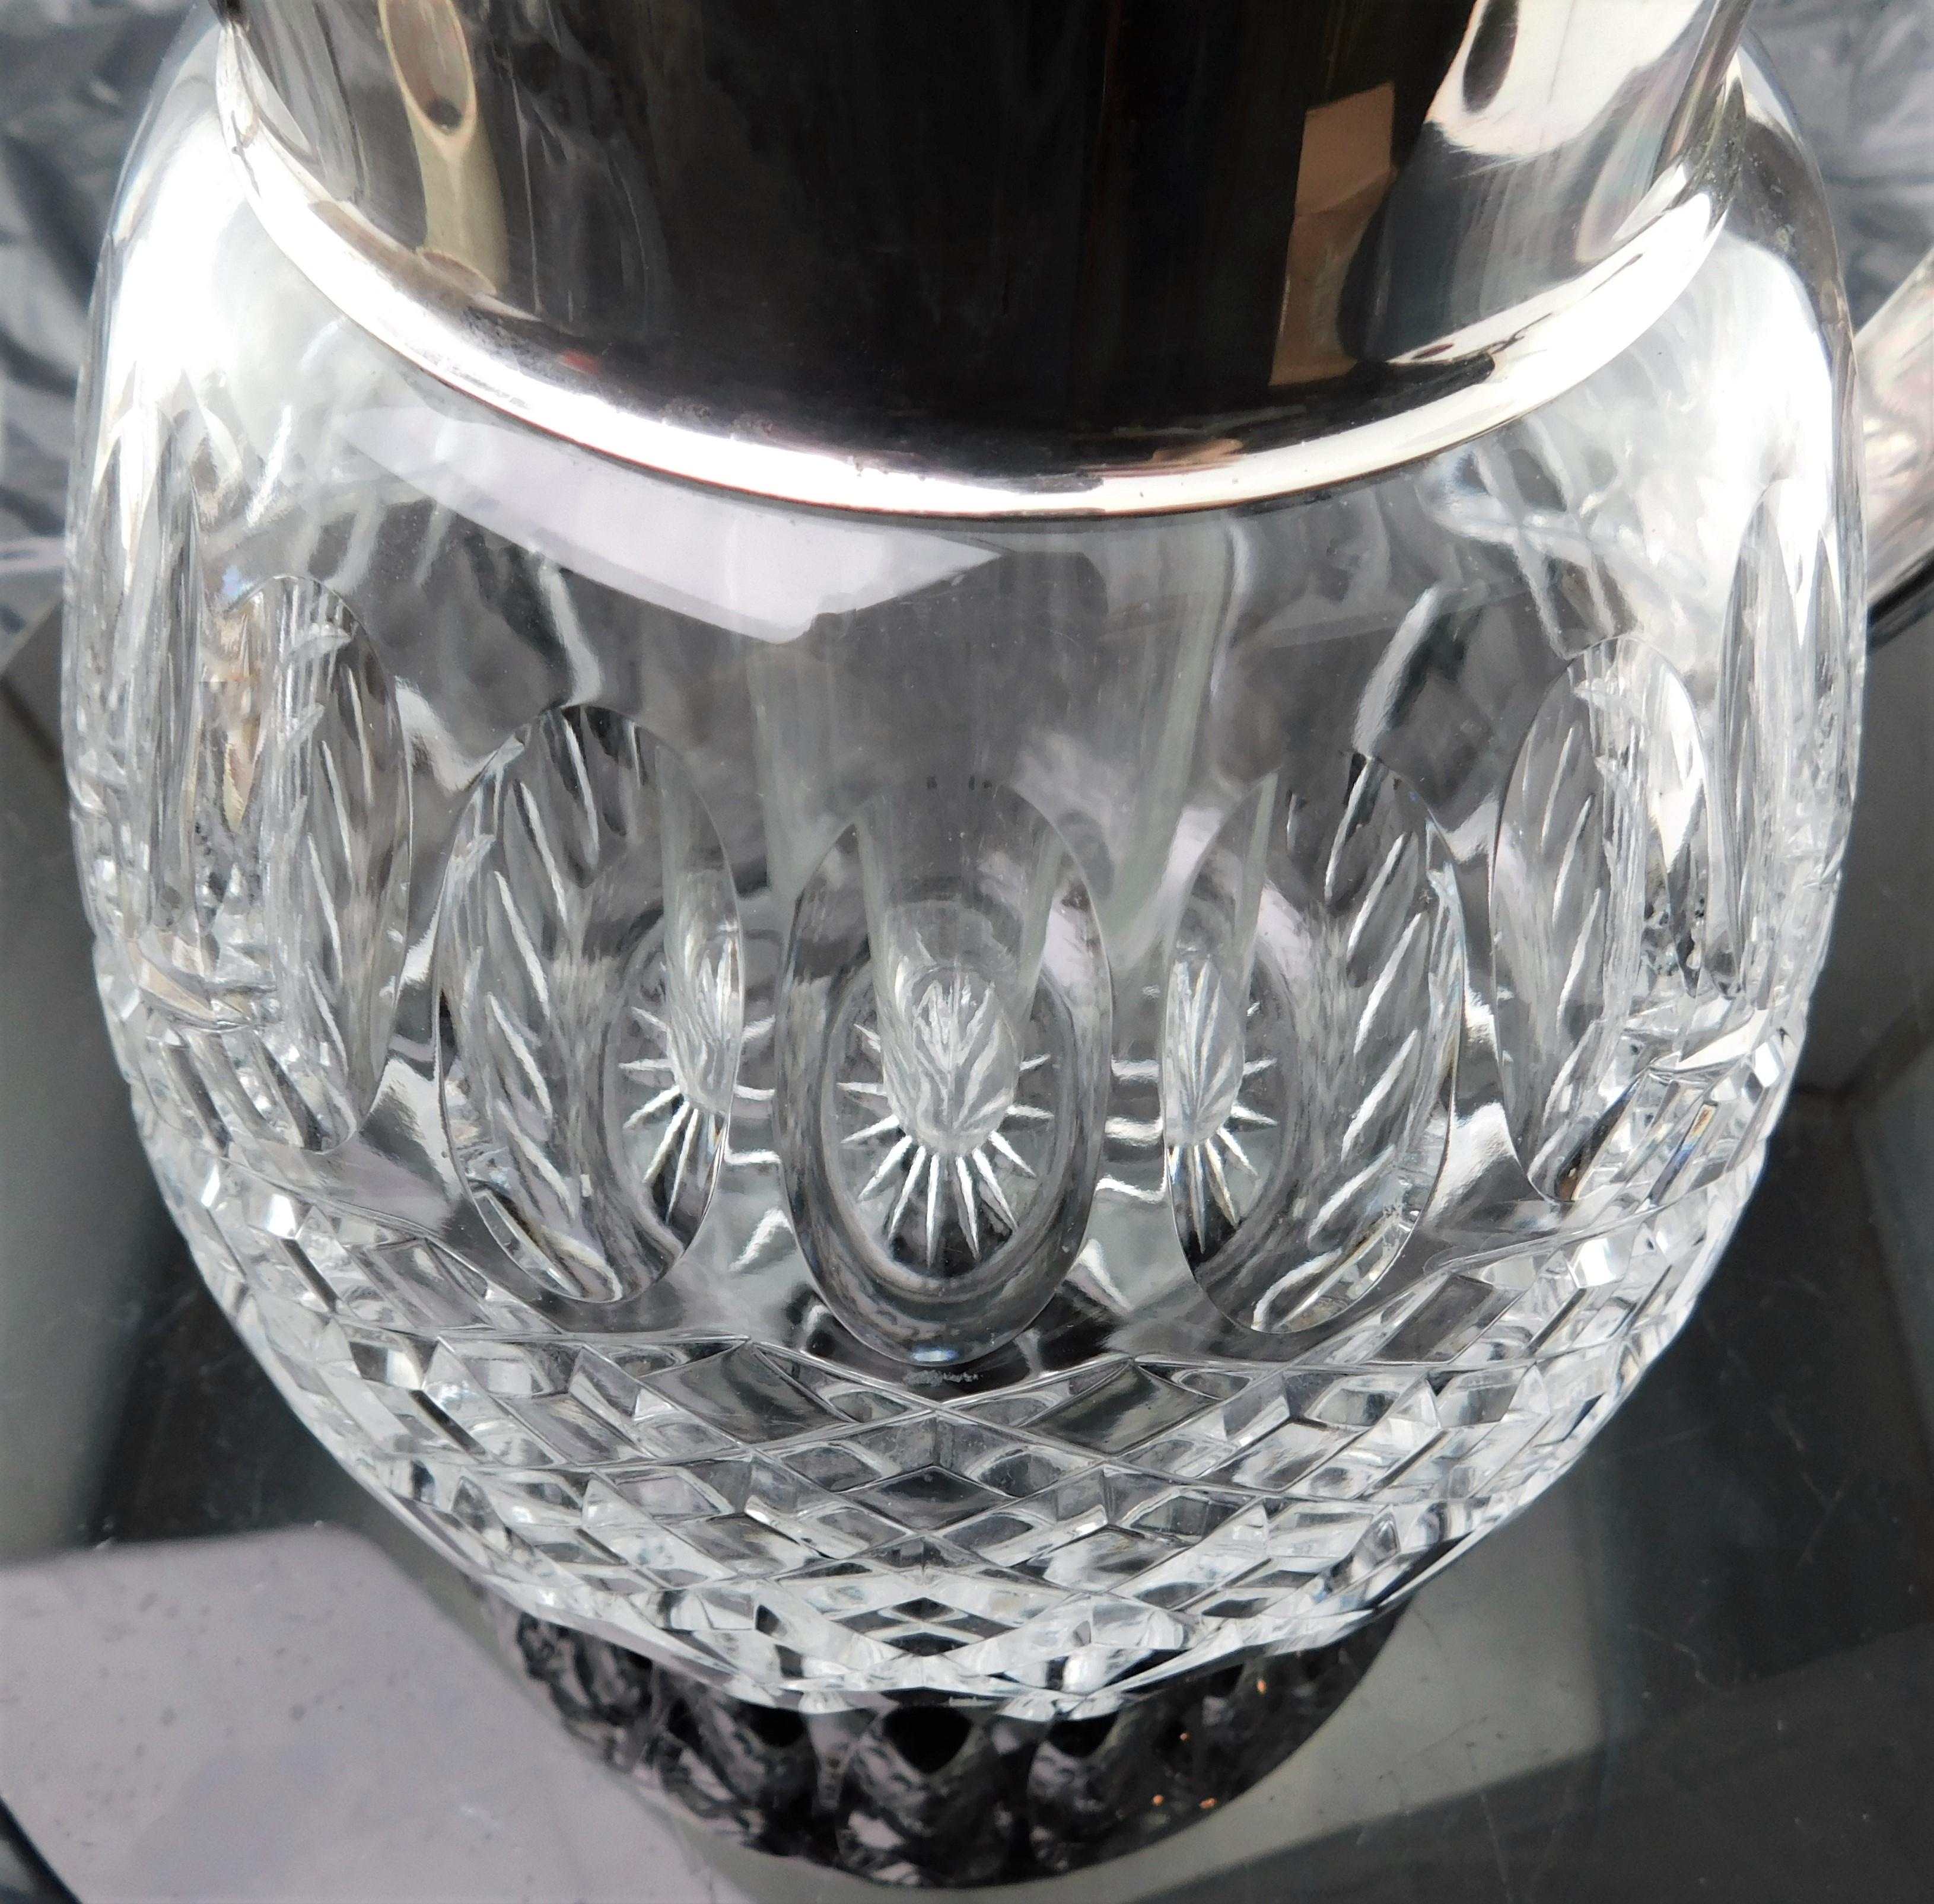 Vintage Silver Plated Crystal Pitcher with Glass Chiller In Good Condition For Sale In Hamilton, Ontario